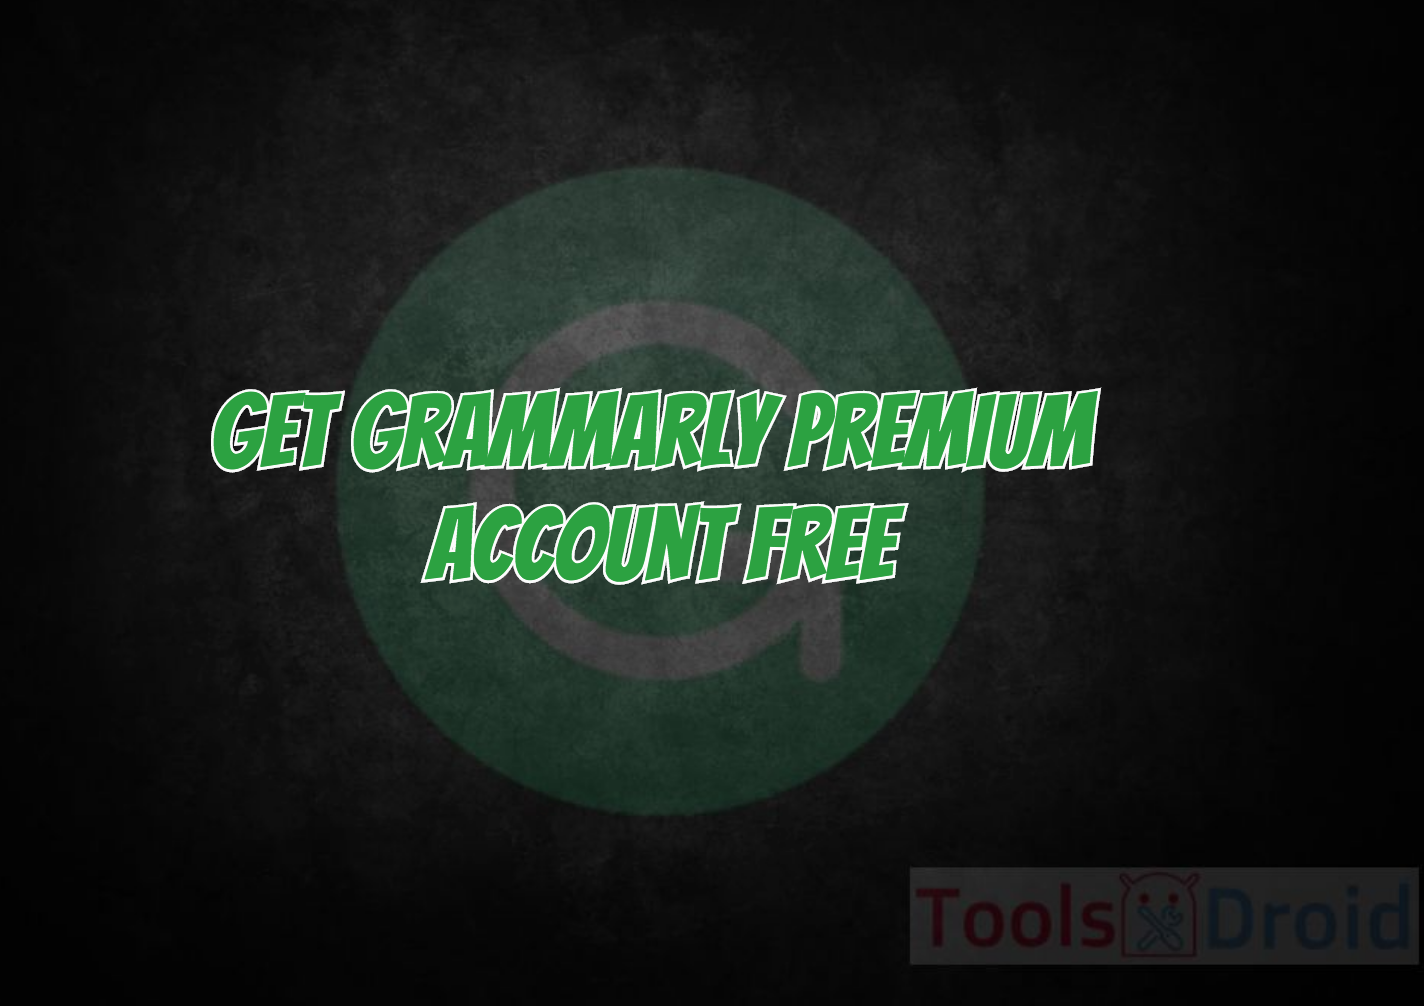 get grammarly for free 2018